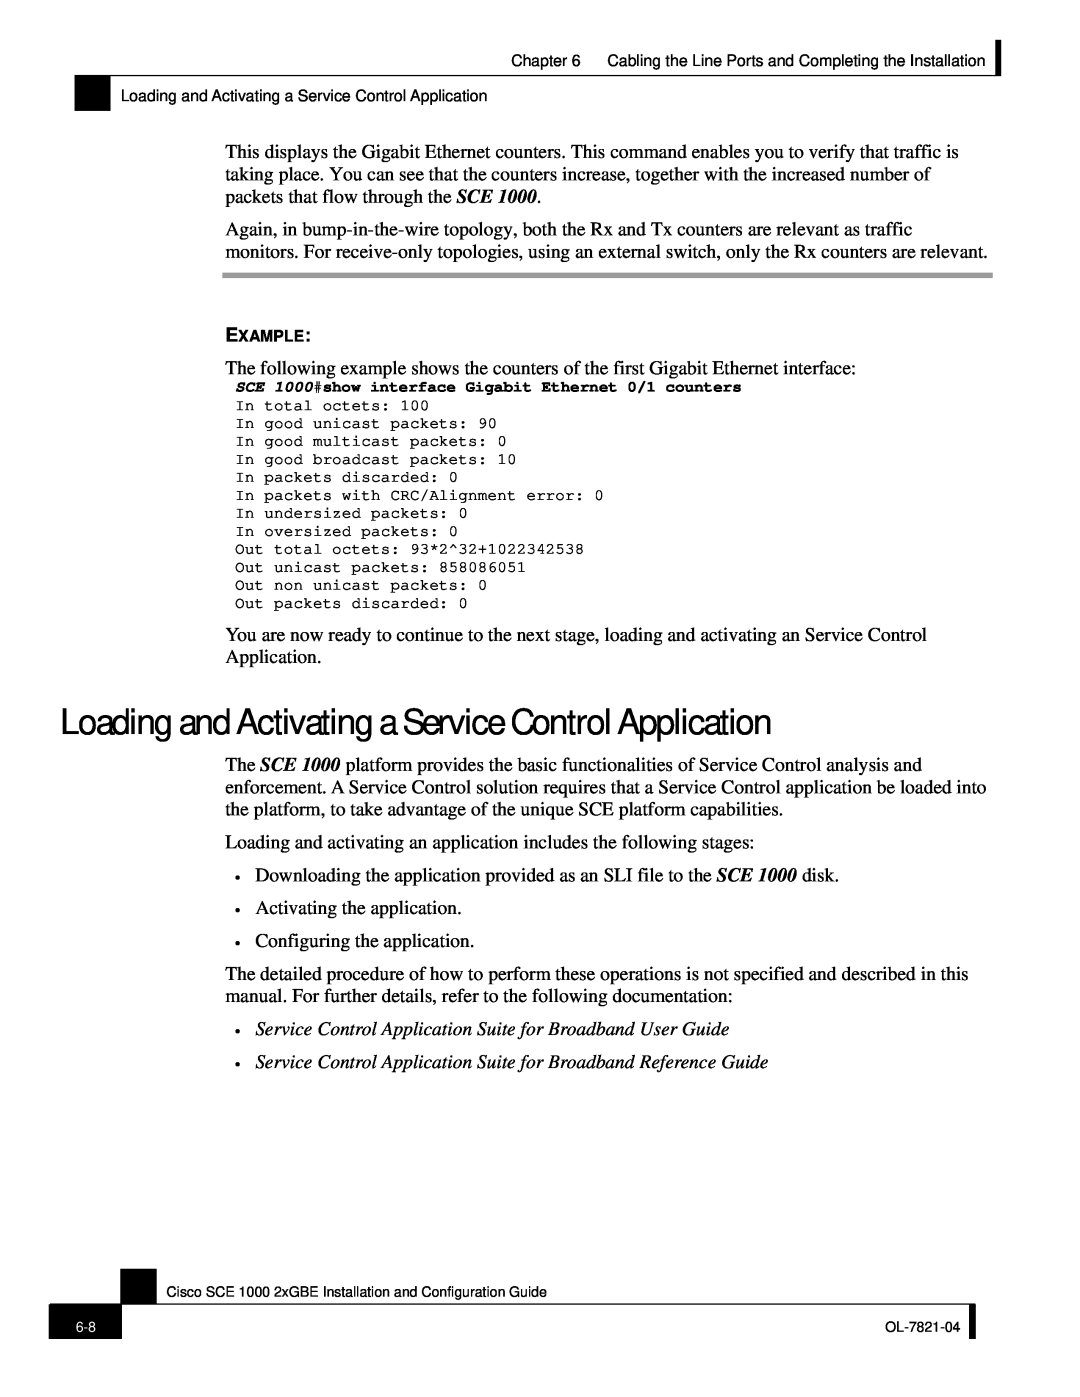 Cisco Systems OL-7821-04, SCE 1000 2xGBE manual Loading and Activating a Service Control Application 